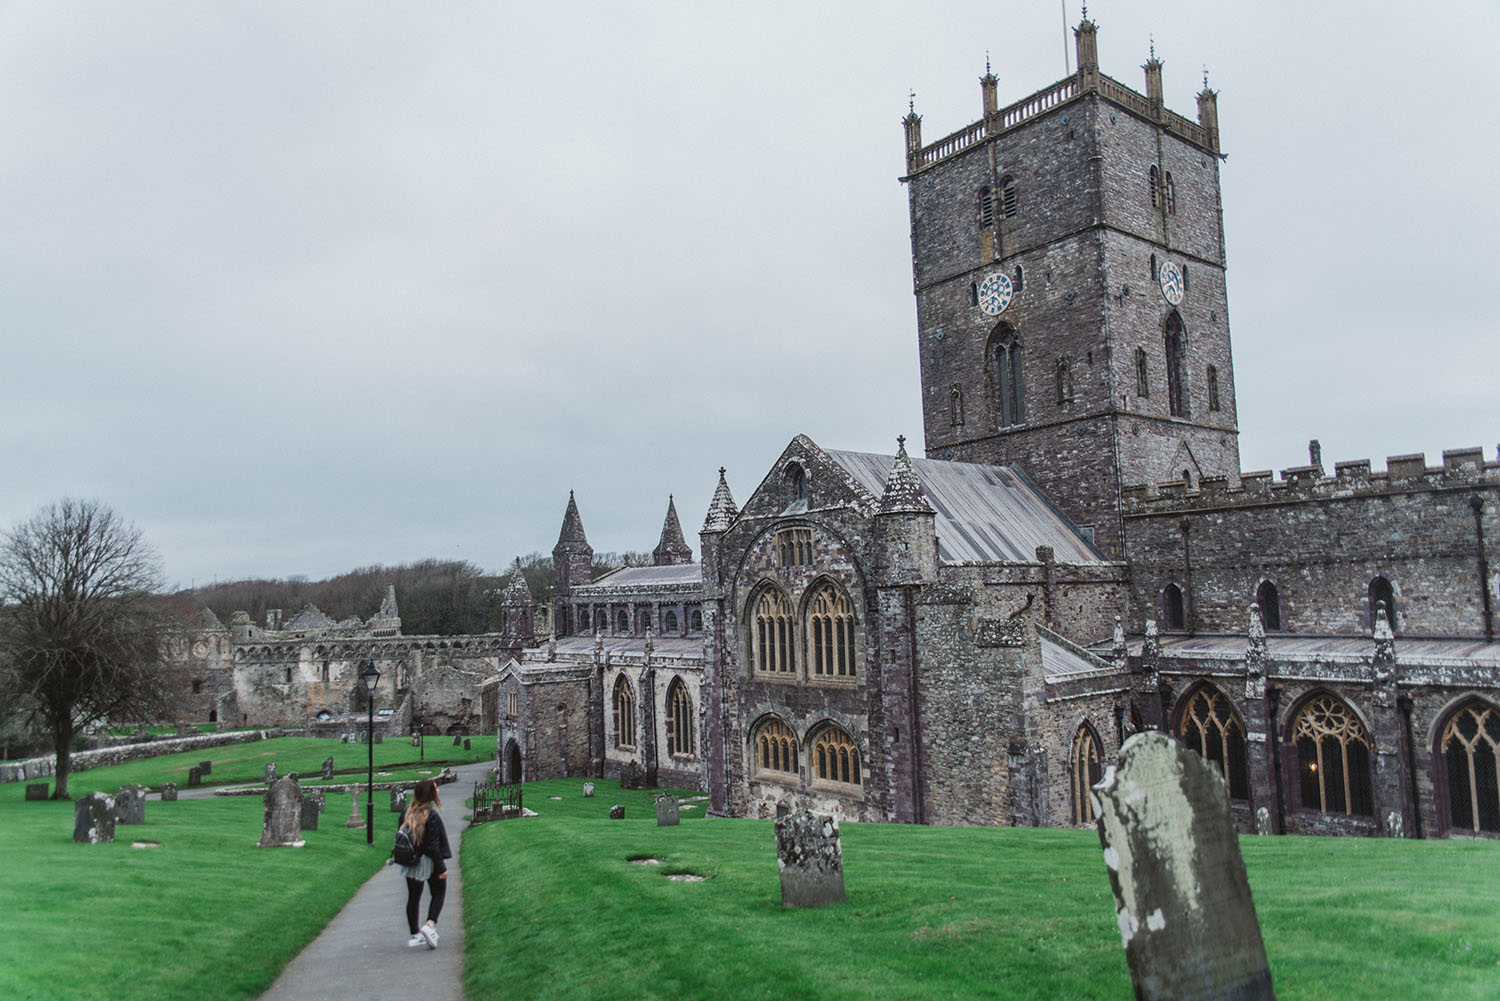 St David's Cathedral in Wales